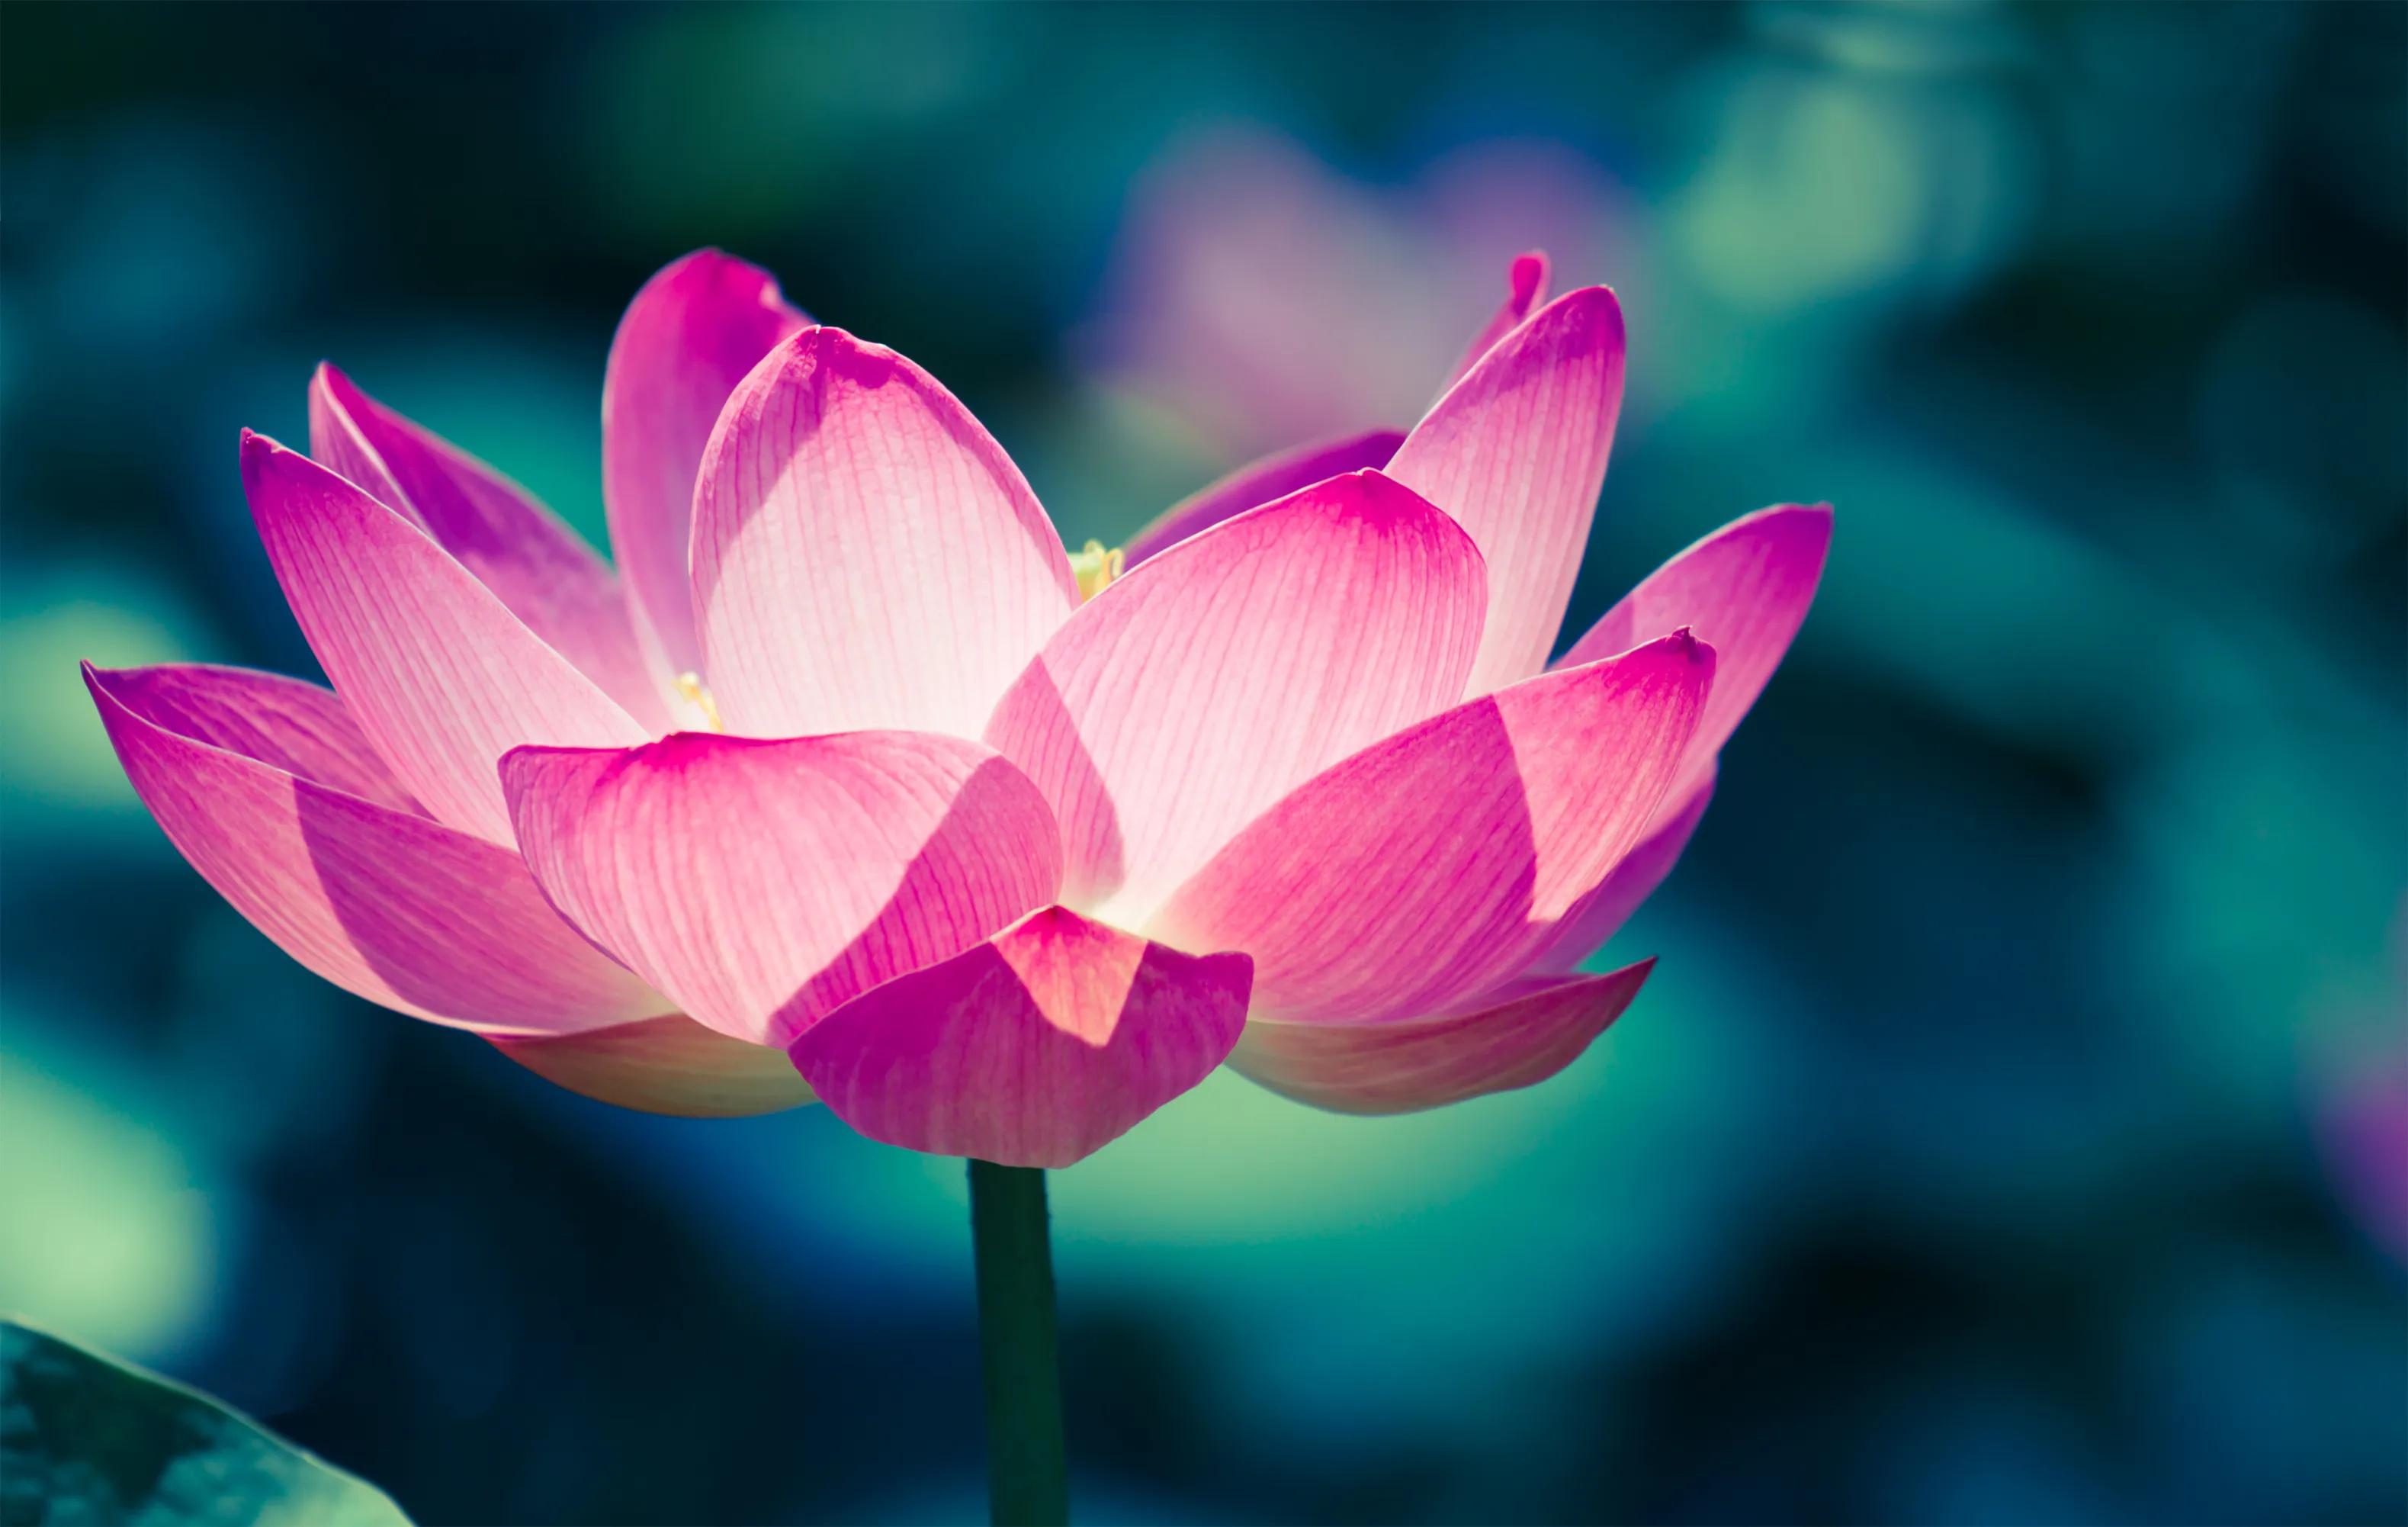 Lotus flower blooming, Exquisite blossoms, Nature's miracle, Captivating transformation, 3160x2010 HD Desktop